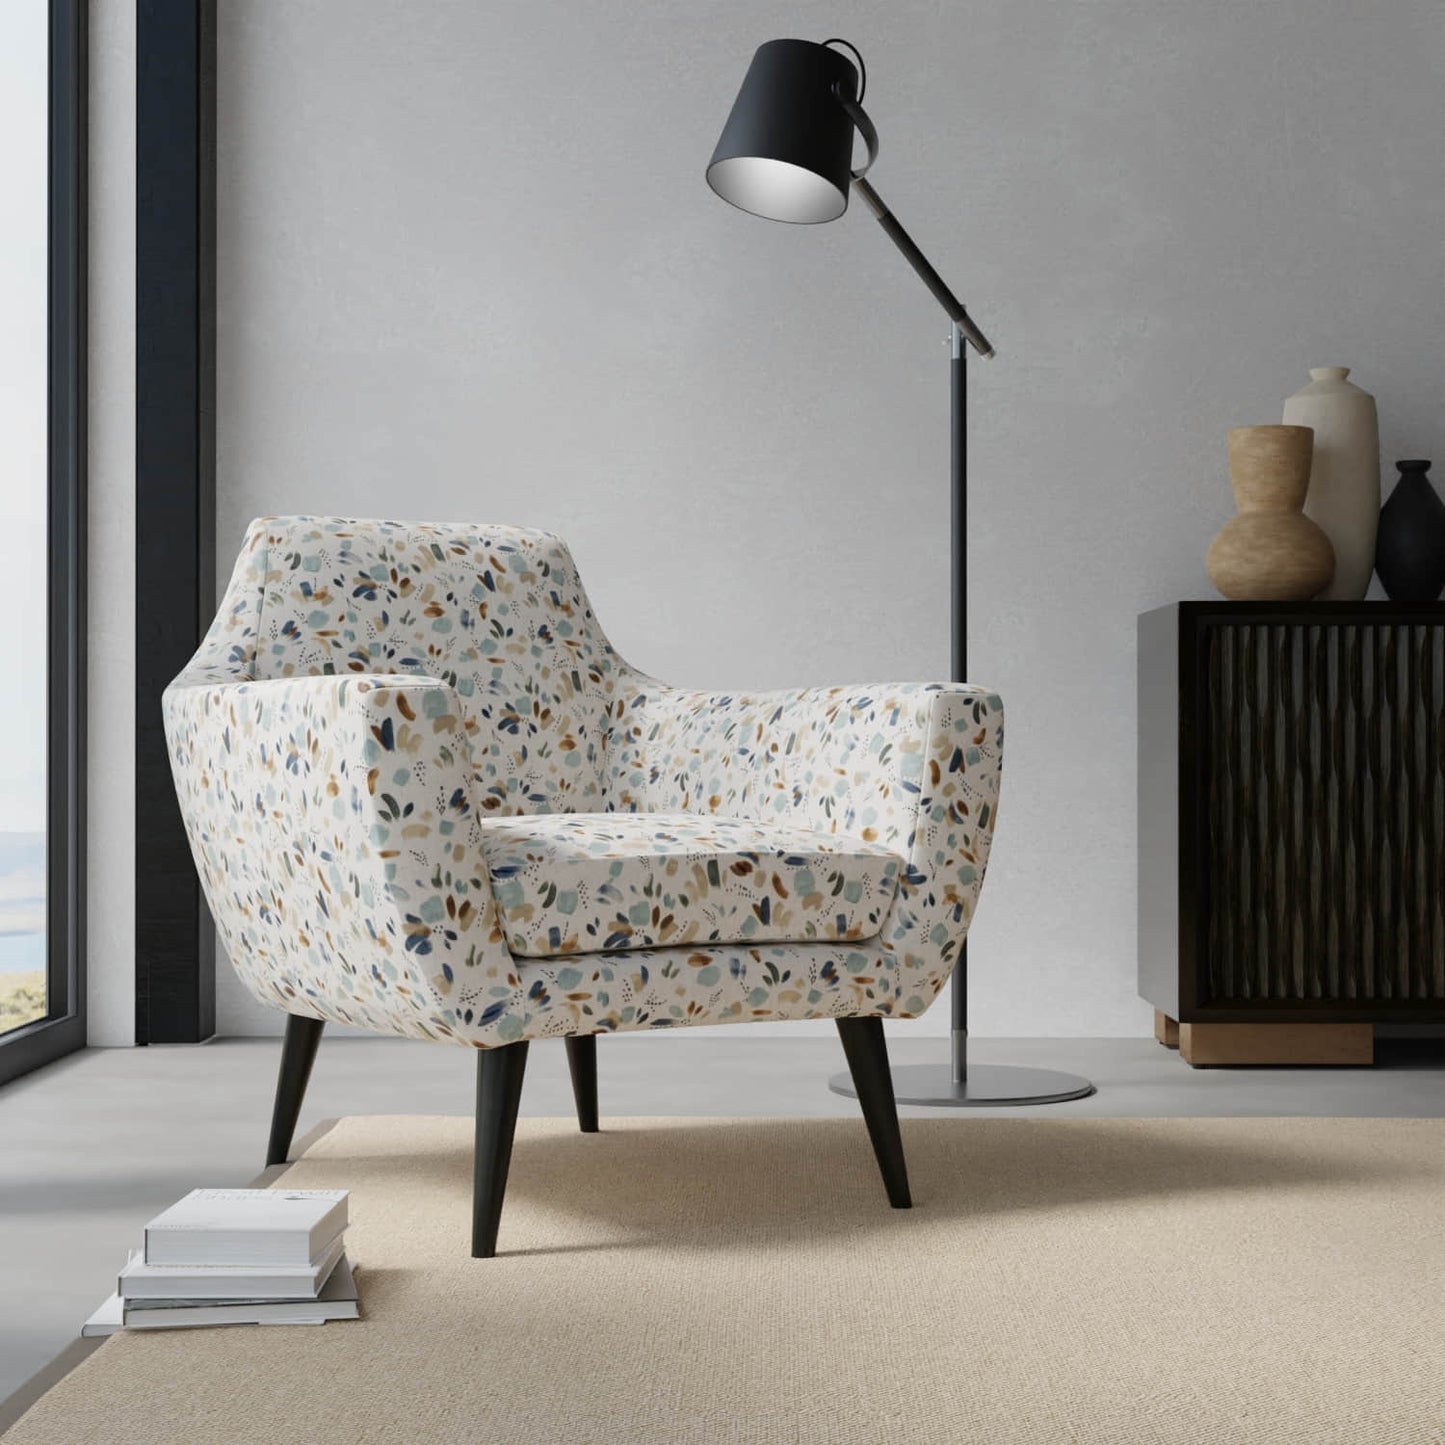 Ezra Mineral upholstered on a contemporary chair